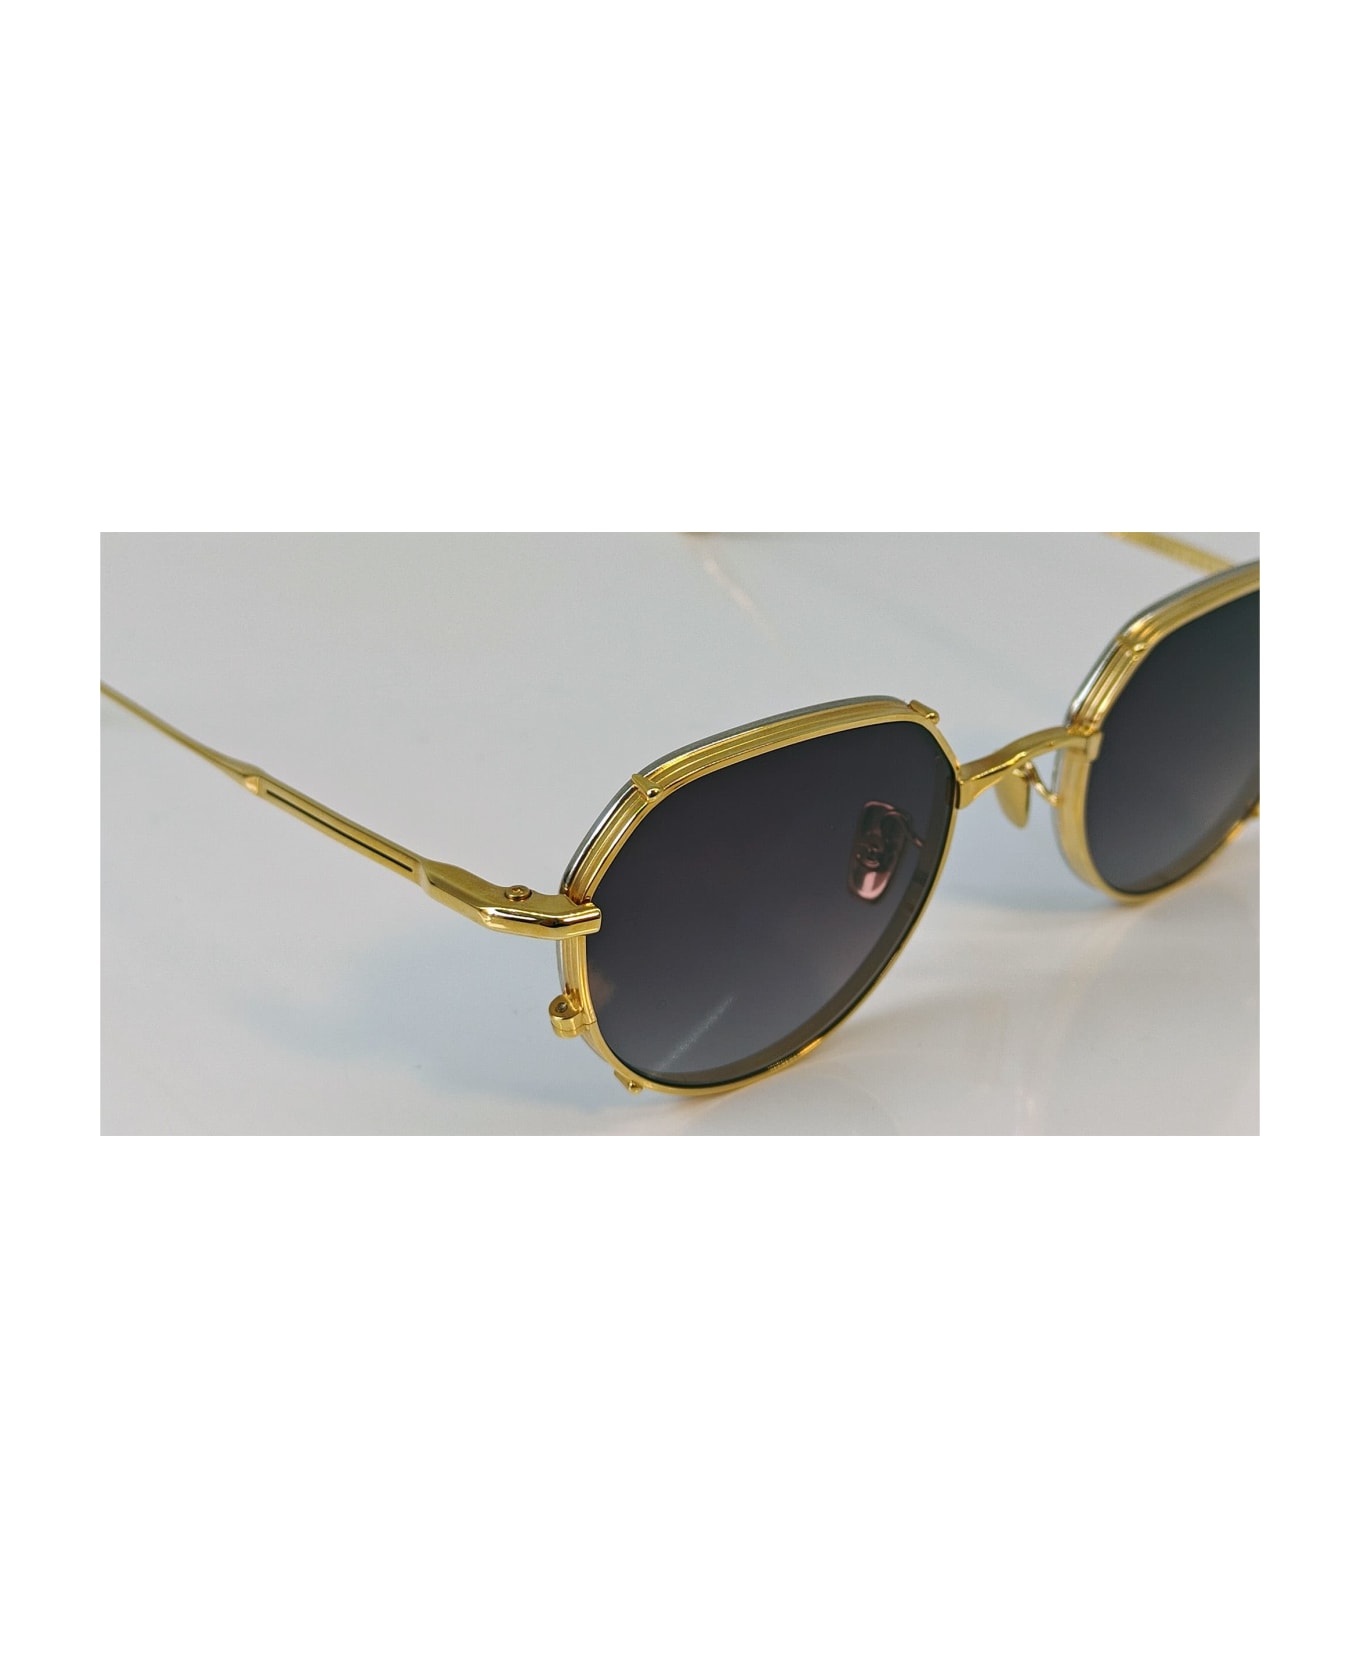 Jacques Marie Mage Hartana - Gold 2 Sunglasses - gold/silver